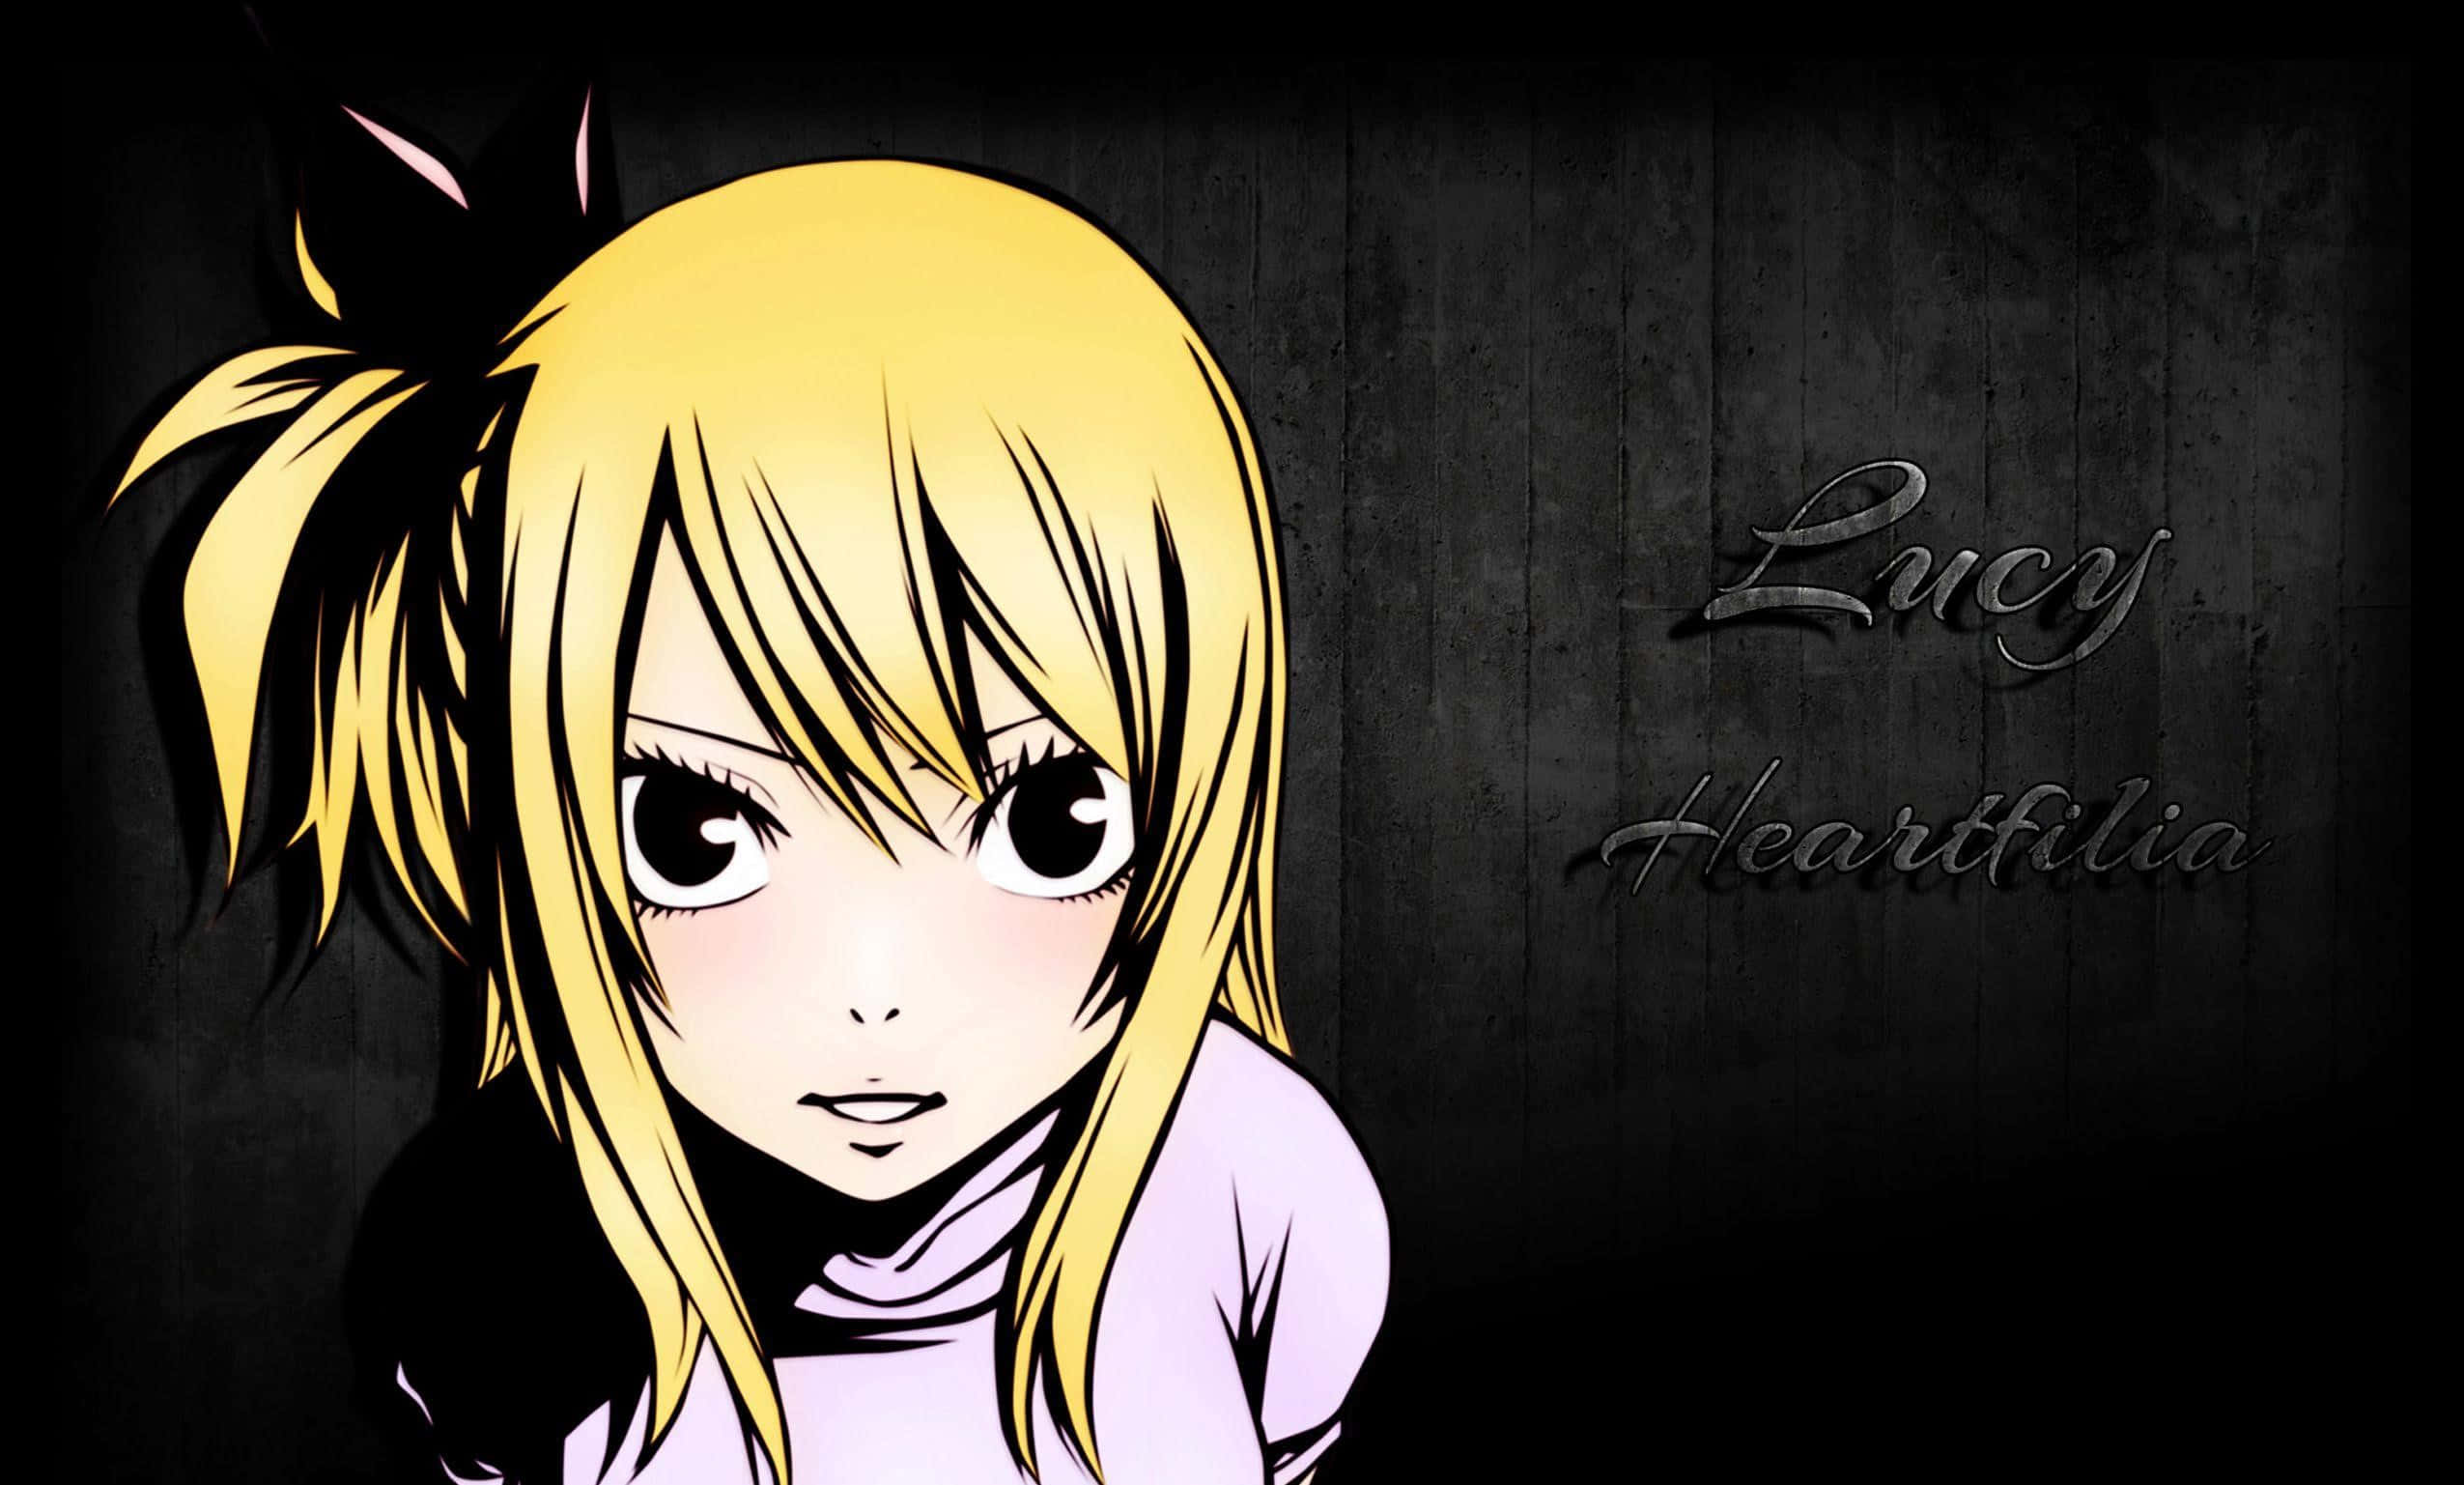 Caption: Lucy Heartfilia - Daring And Charming Fairy Tail Mage Background